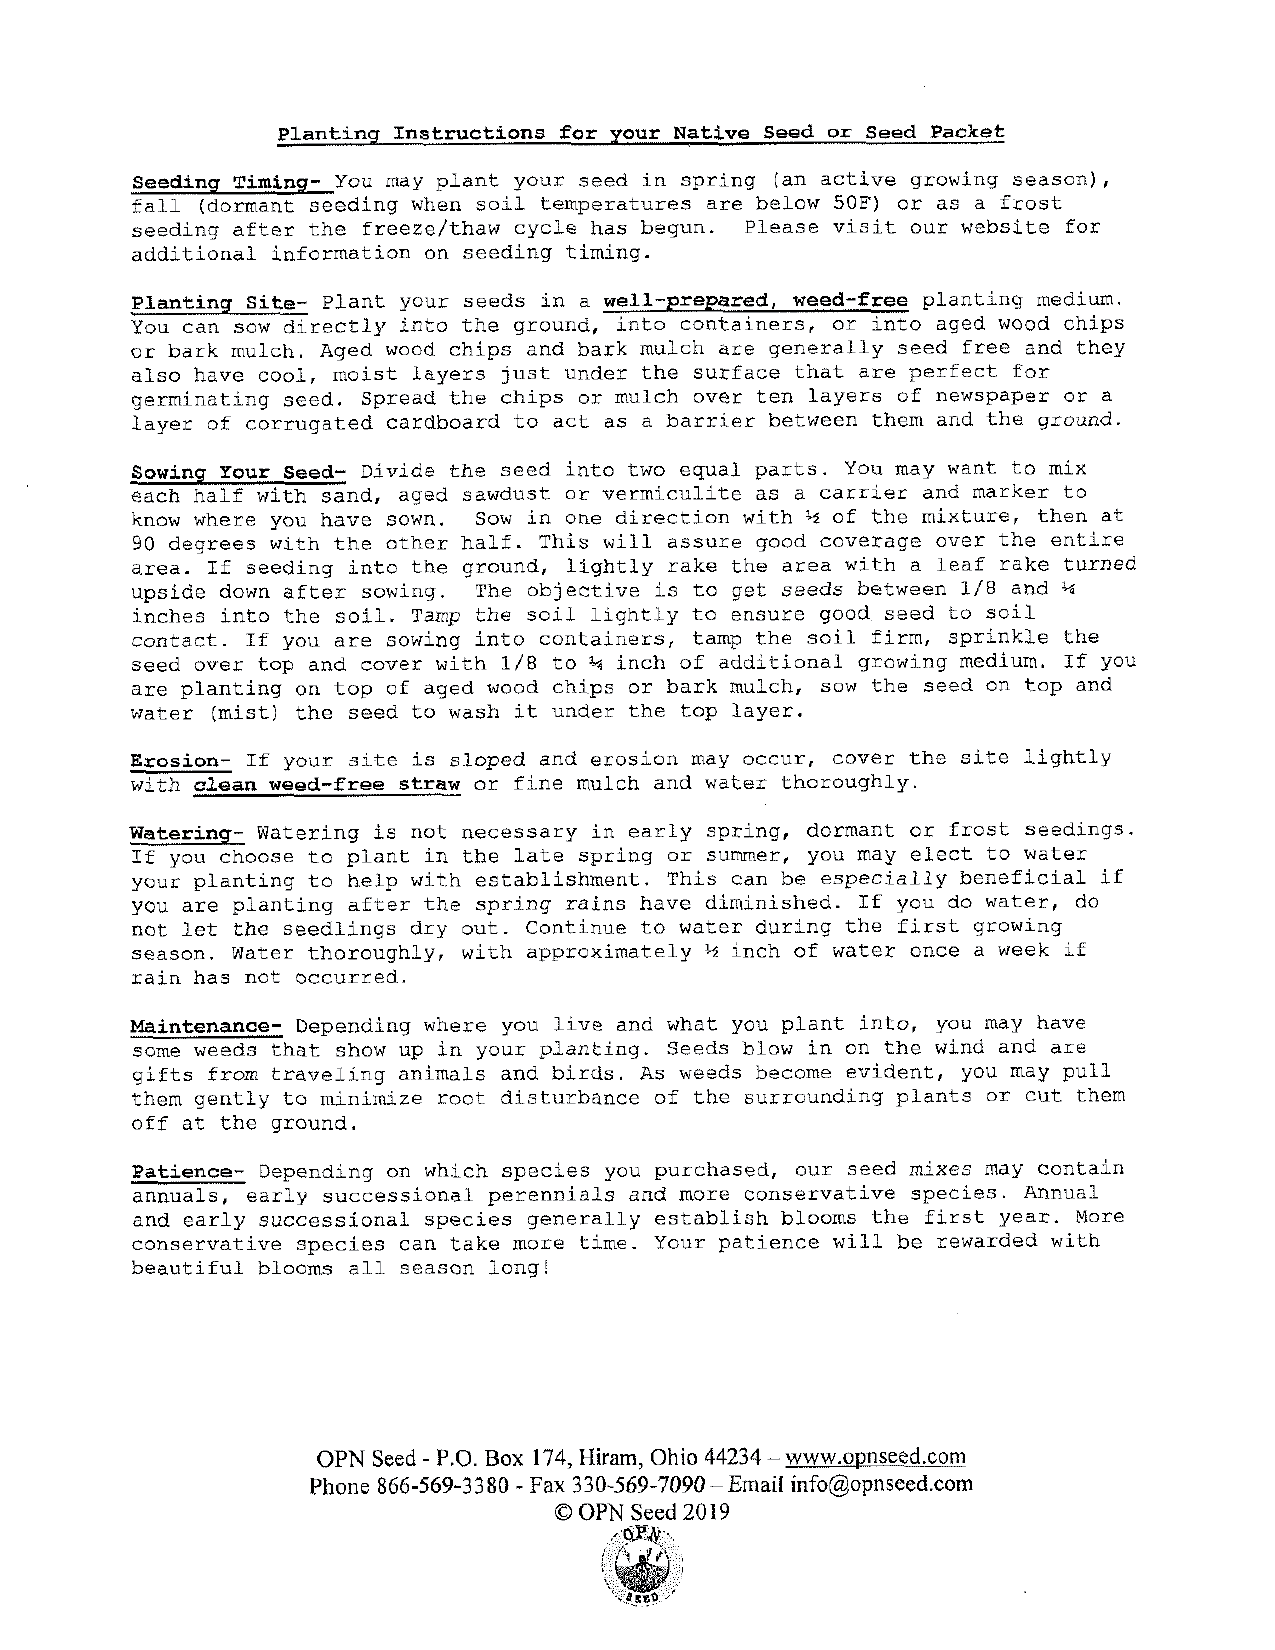 photo of typed planting instructions from OPNseed.com